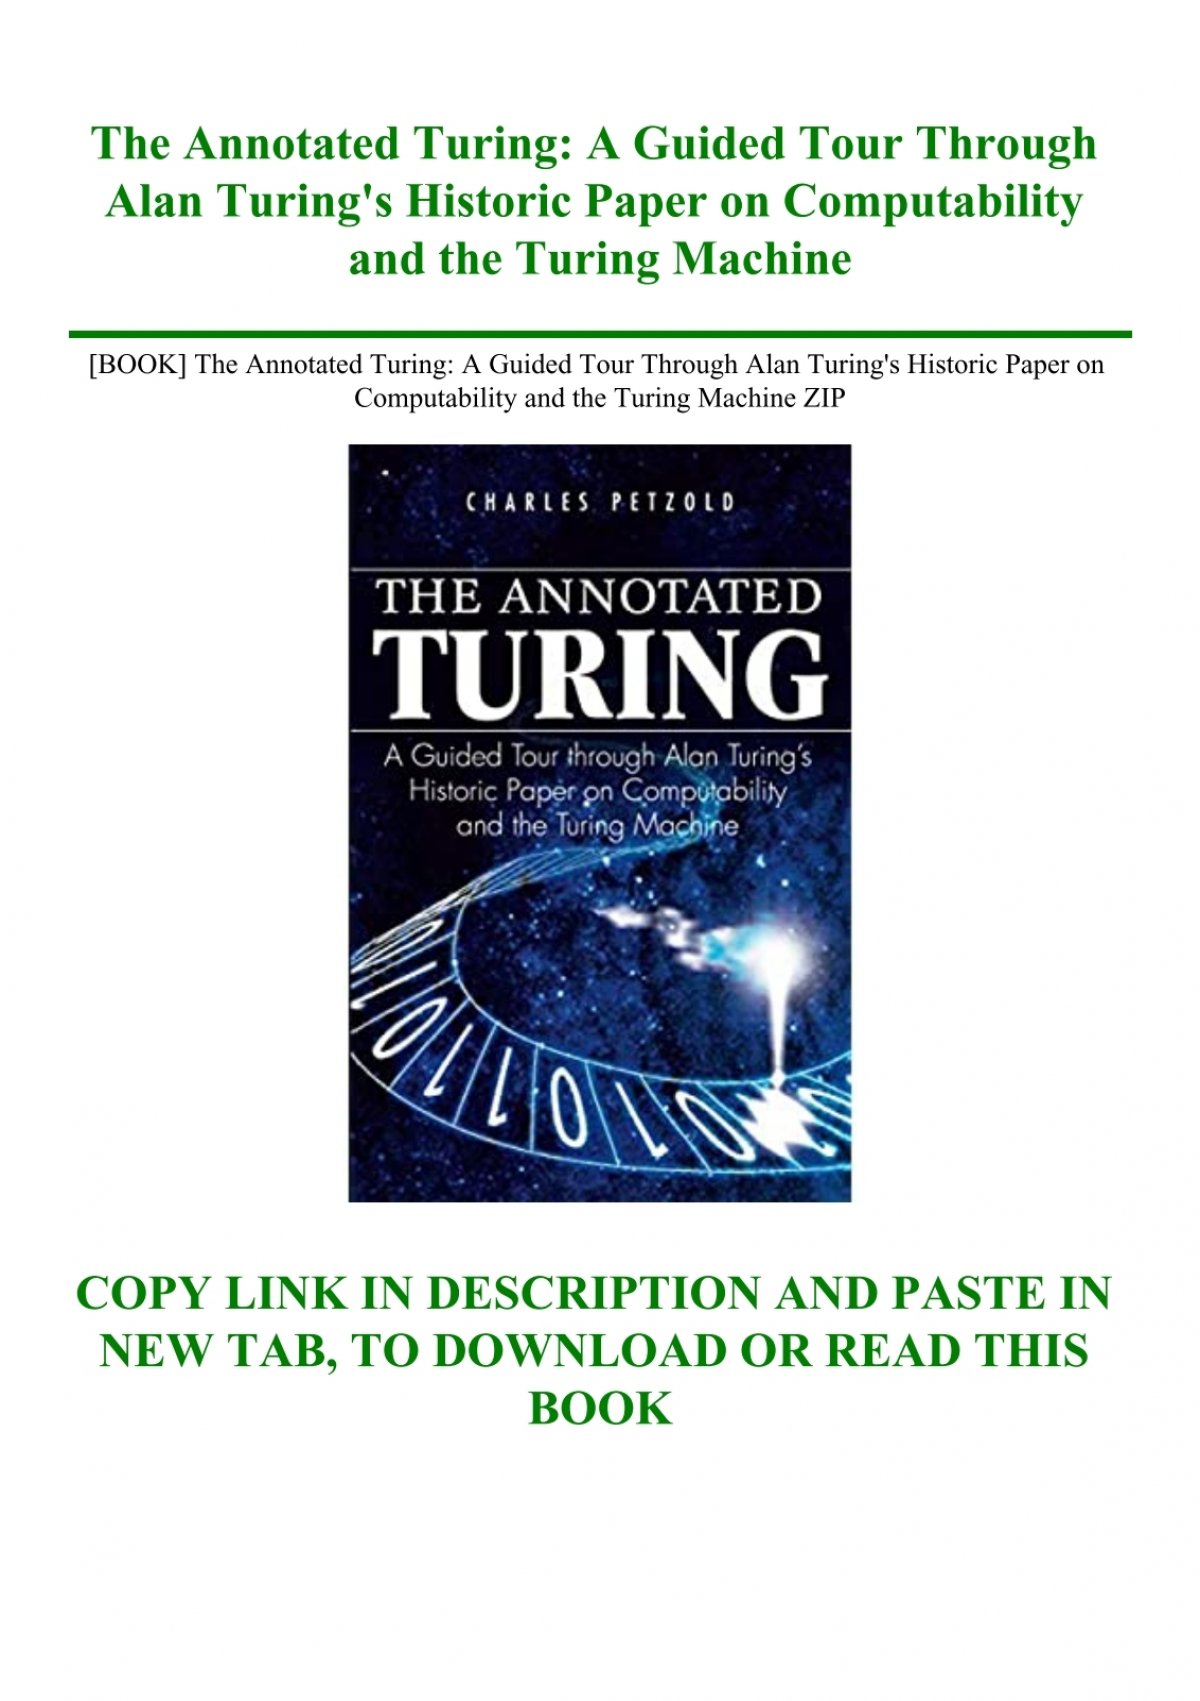 The Annotated Turing: A Guided Tour Through Alan Turing's Historic